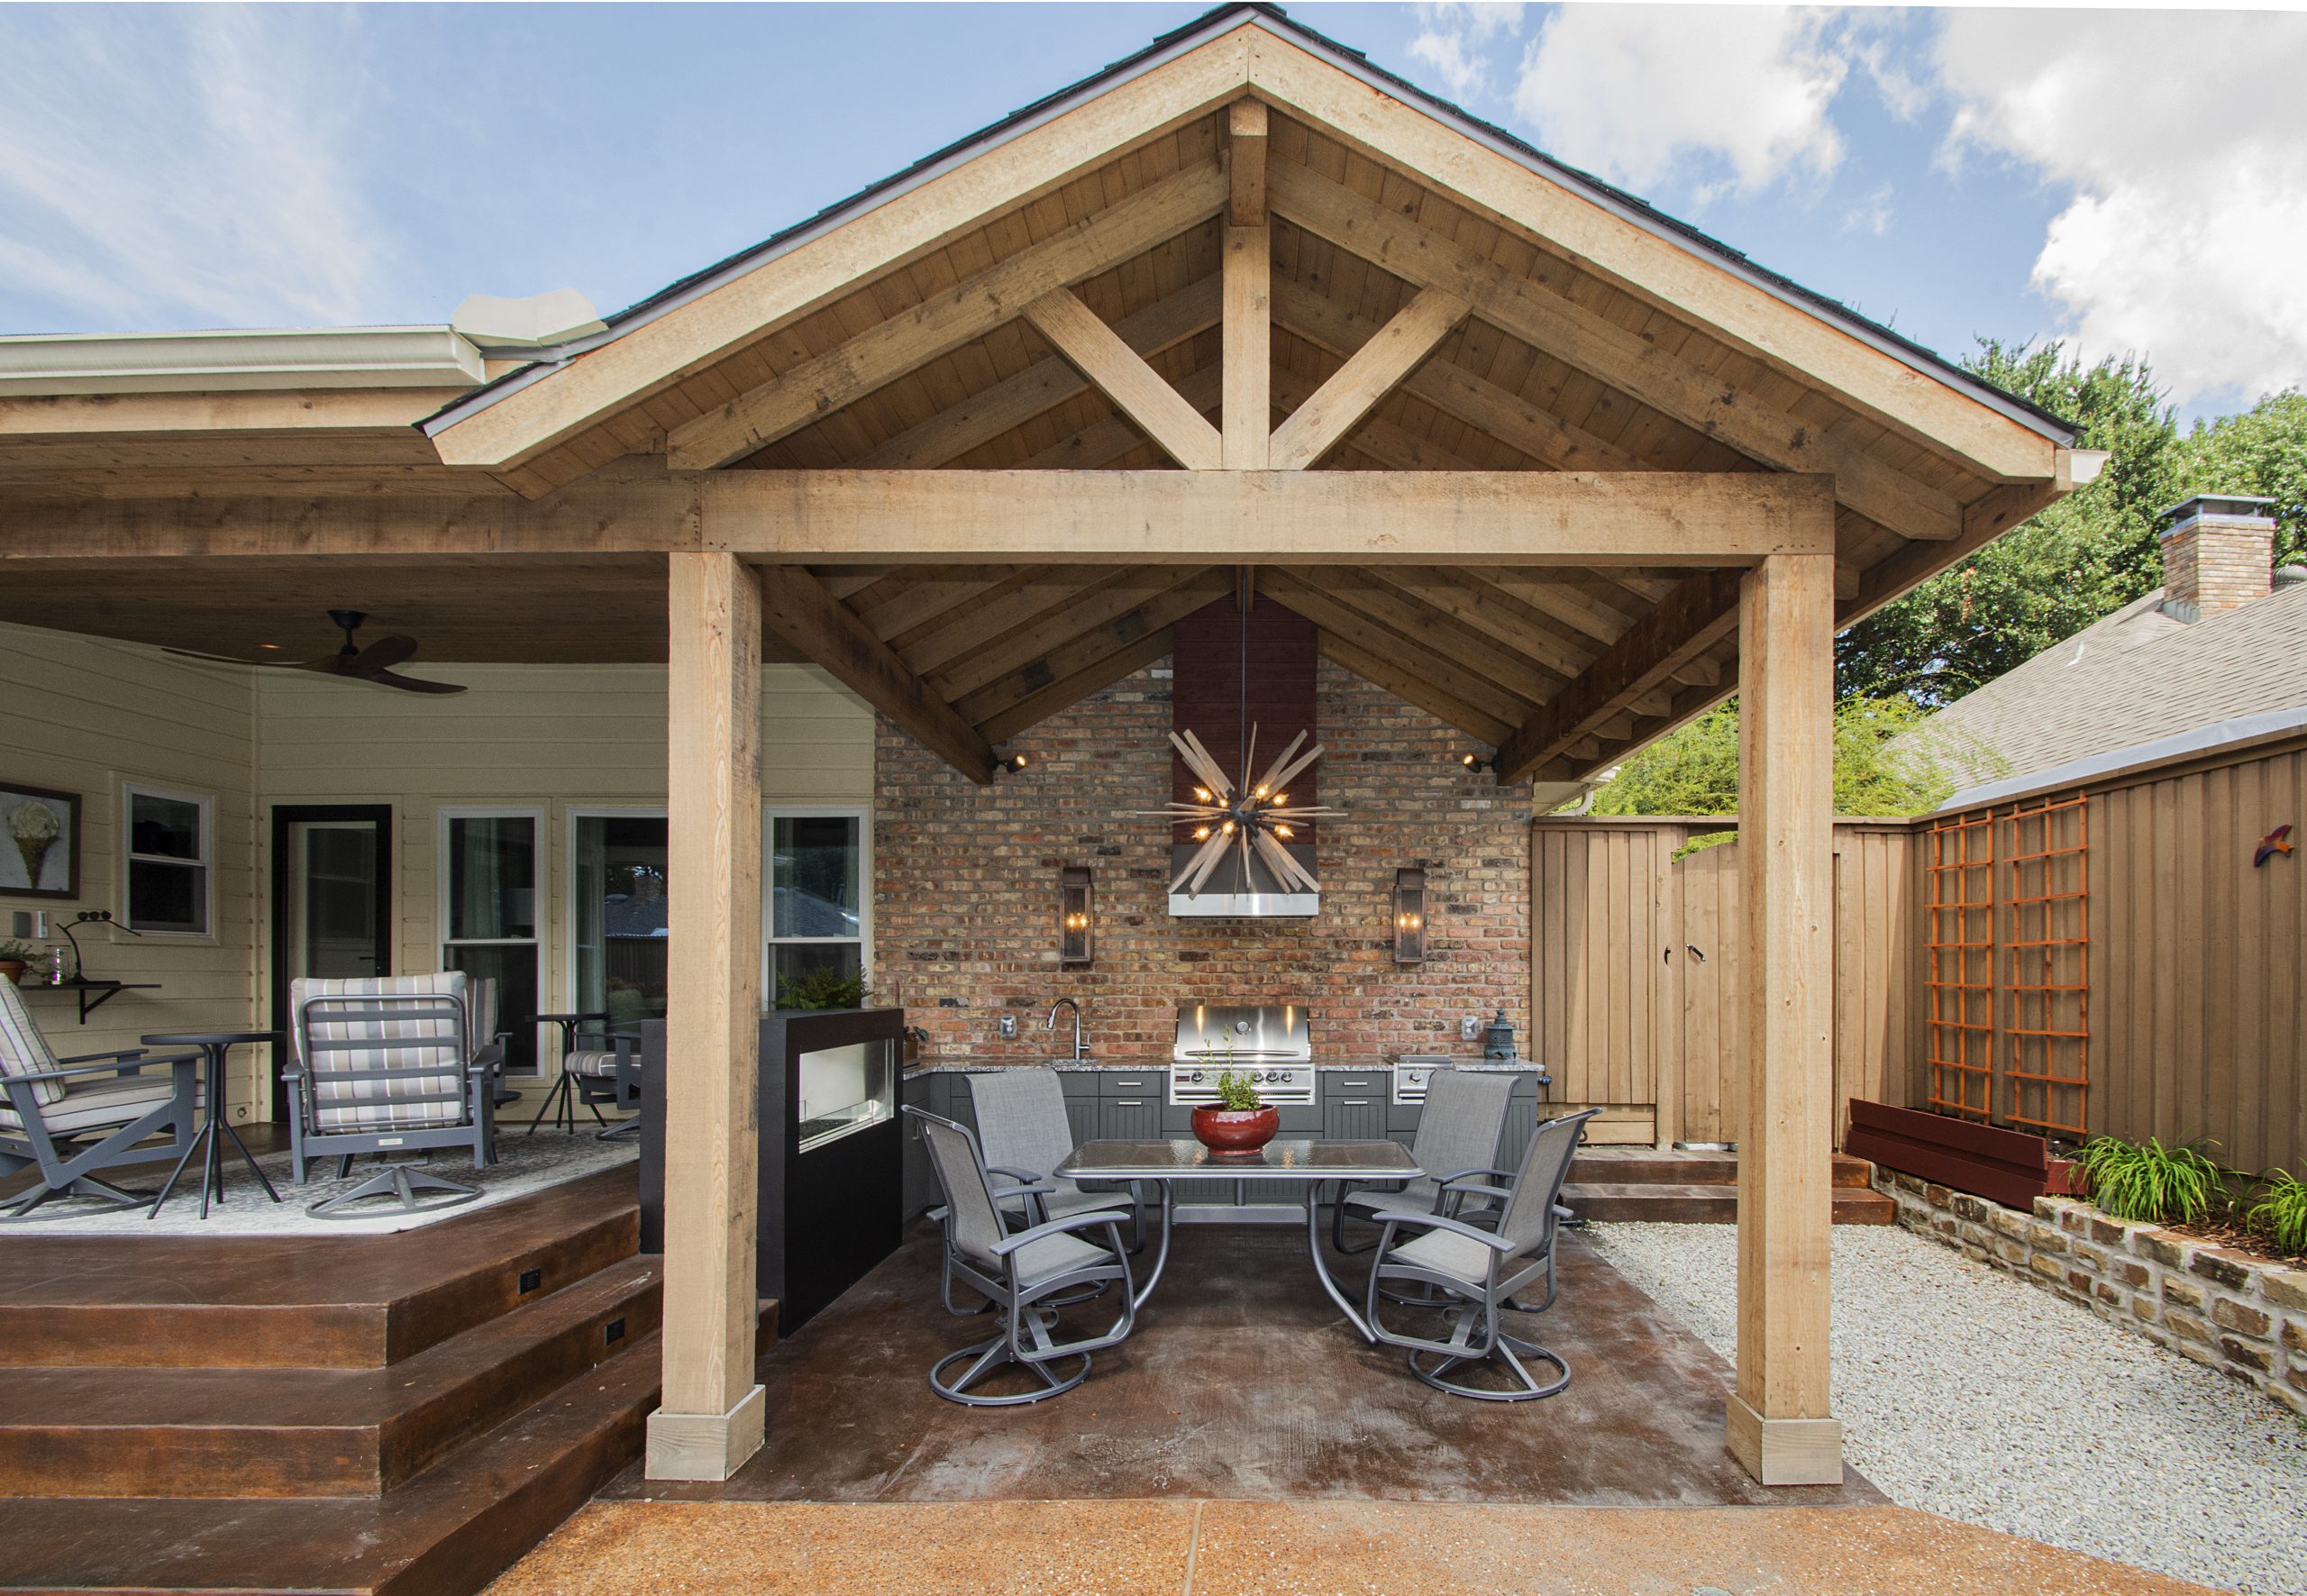 Award-Winning Pool and Patio Outdoor Living Space